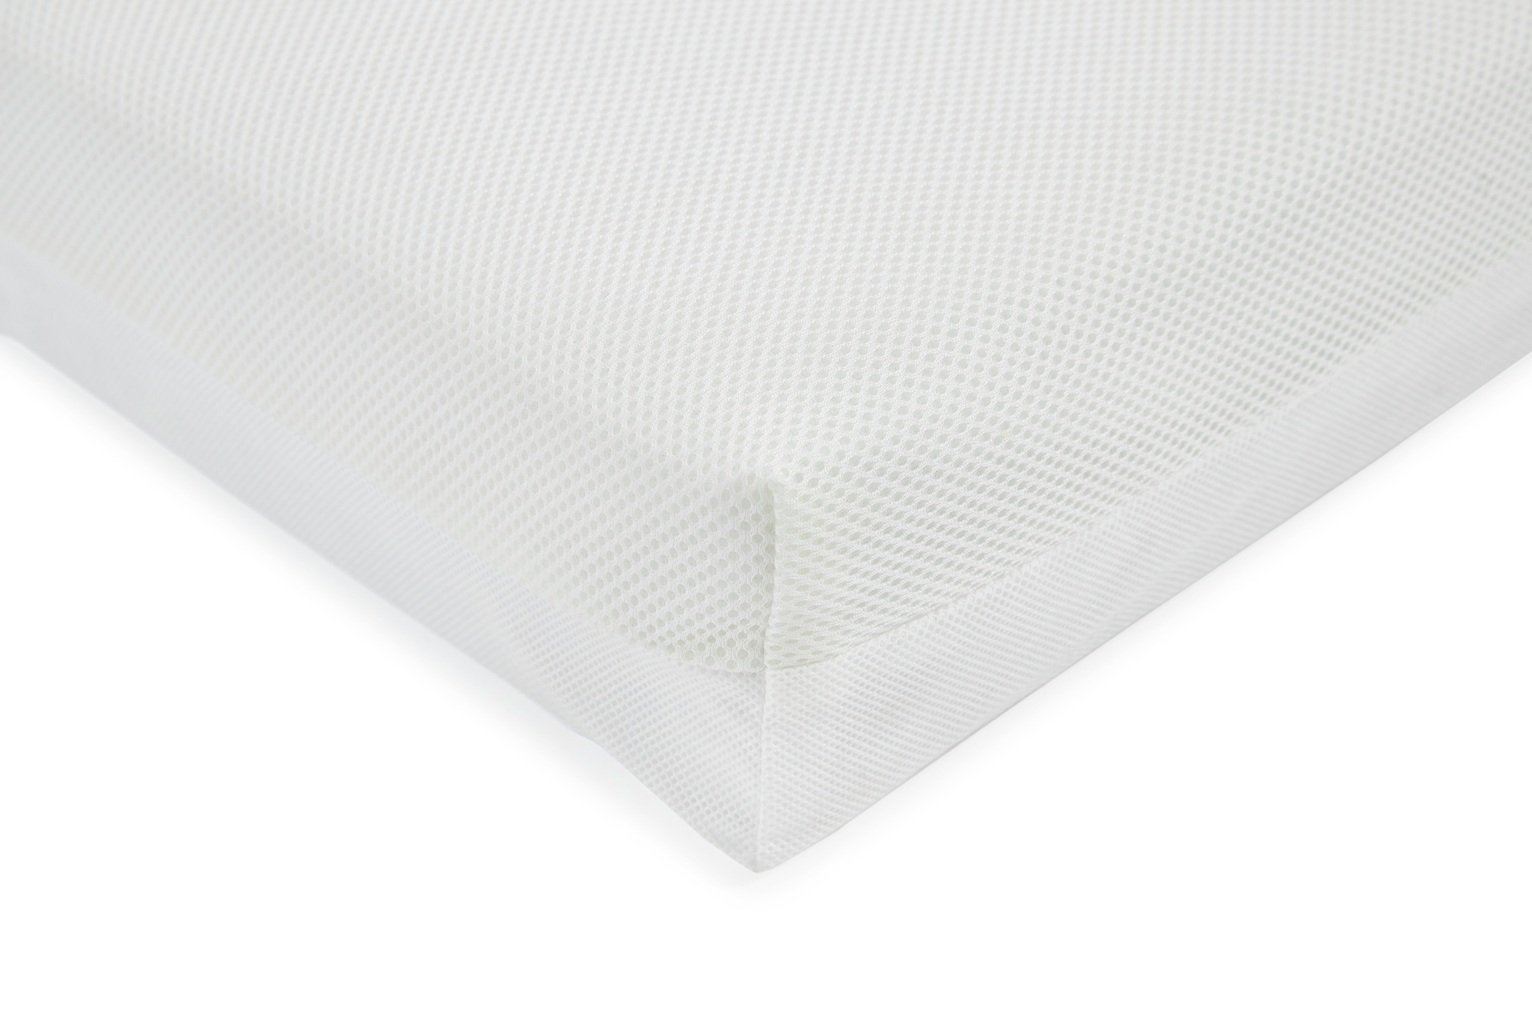 Baby Elegance 140 x 70cm Breathe-Dry Pocket Cot Bed Mattress Review